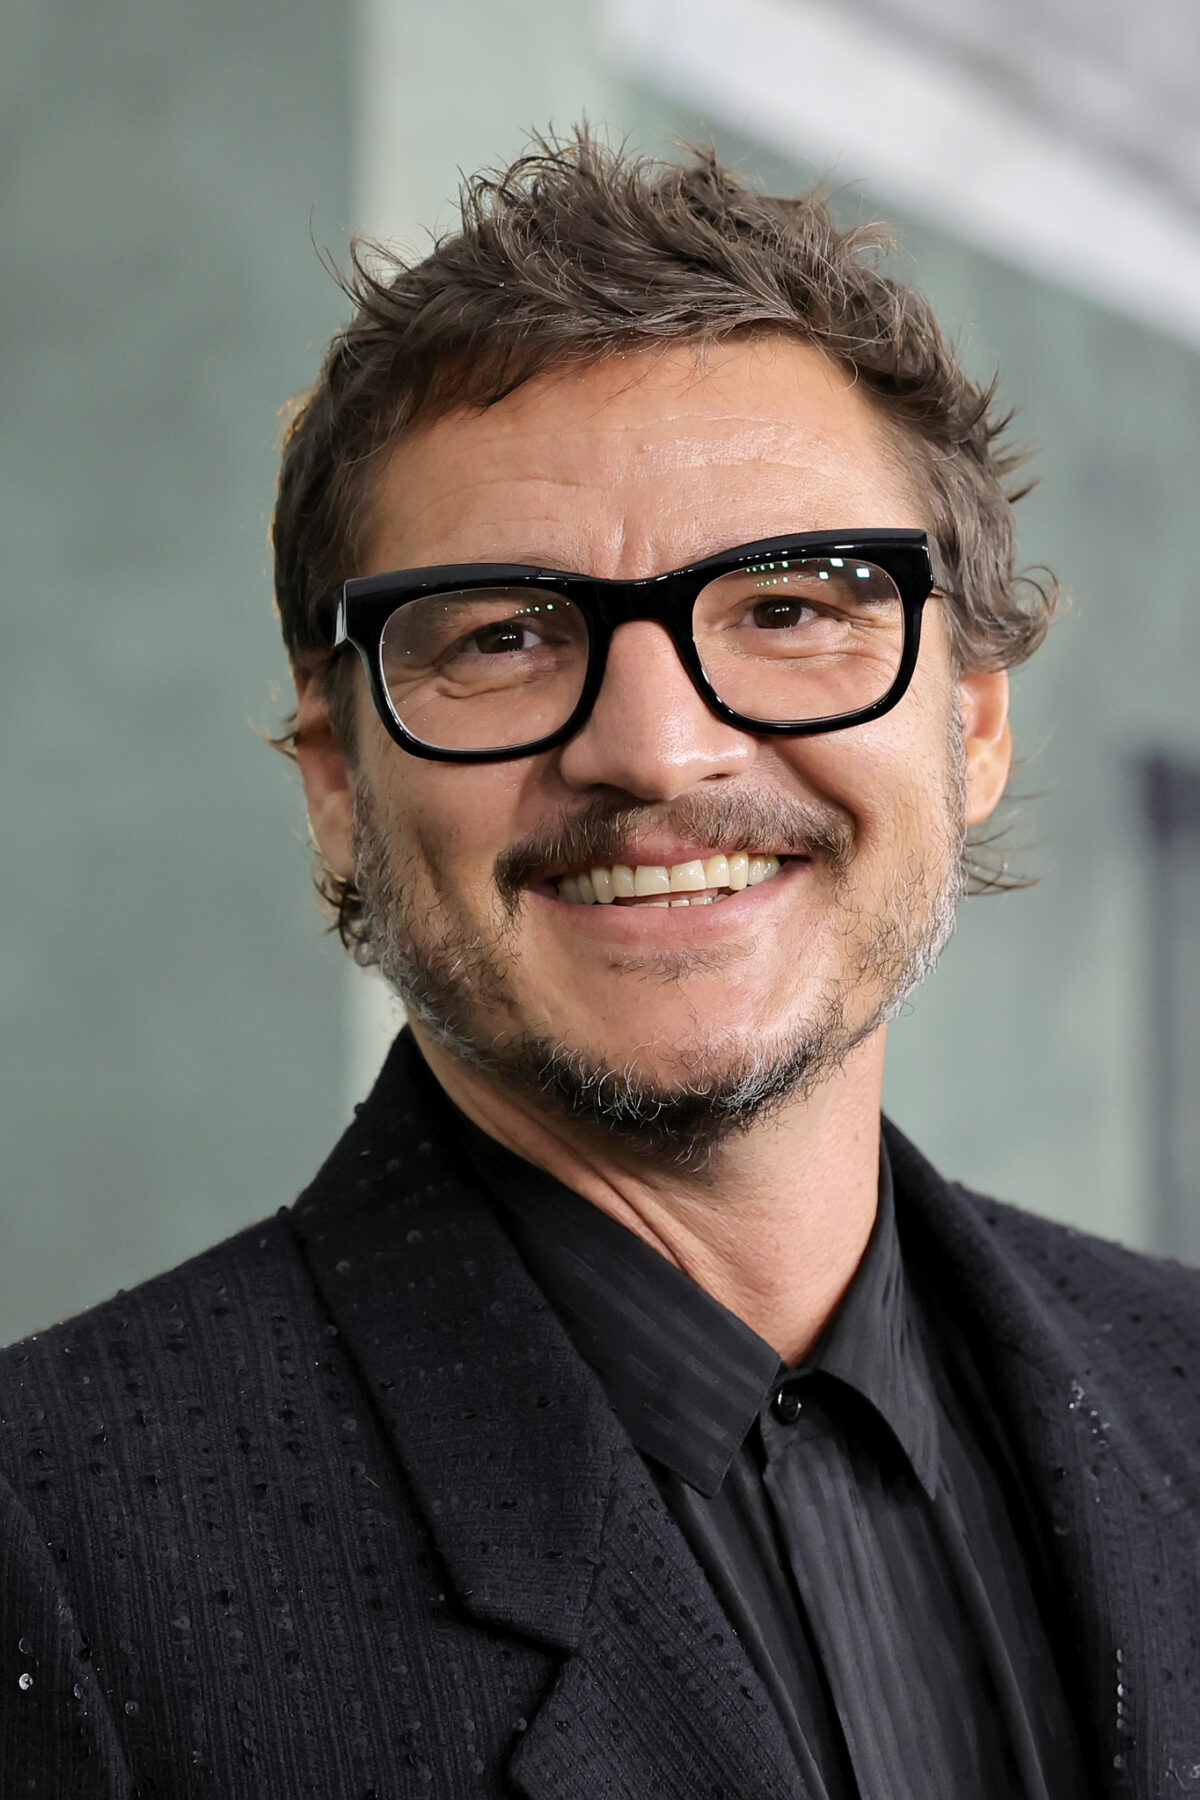 LOS ANGELES, CALIFORNIA - JANUARY 09: Pedro Pascal attends the Los Angeles Premiere of HBO's 